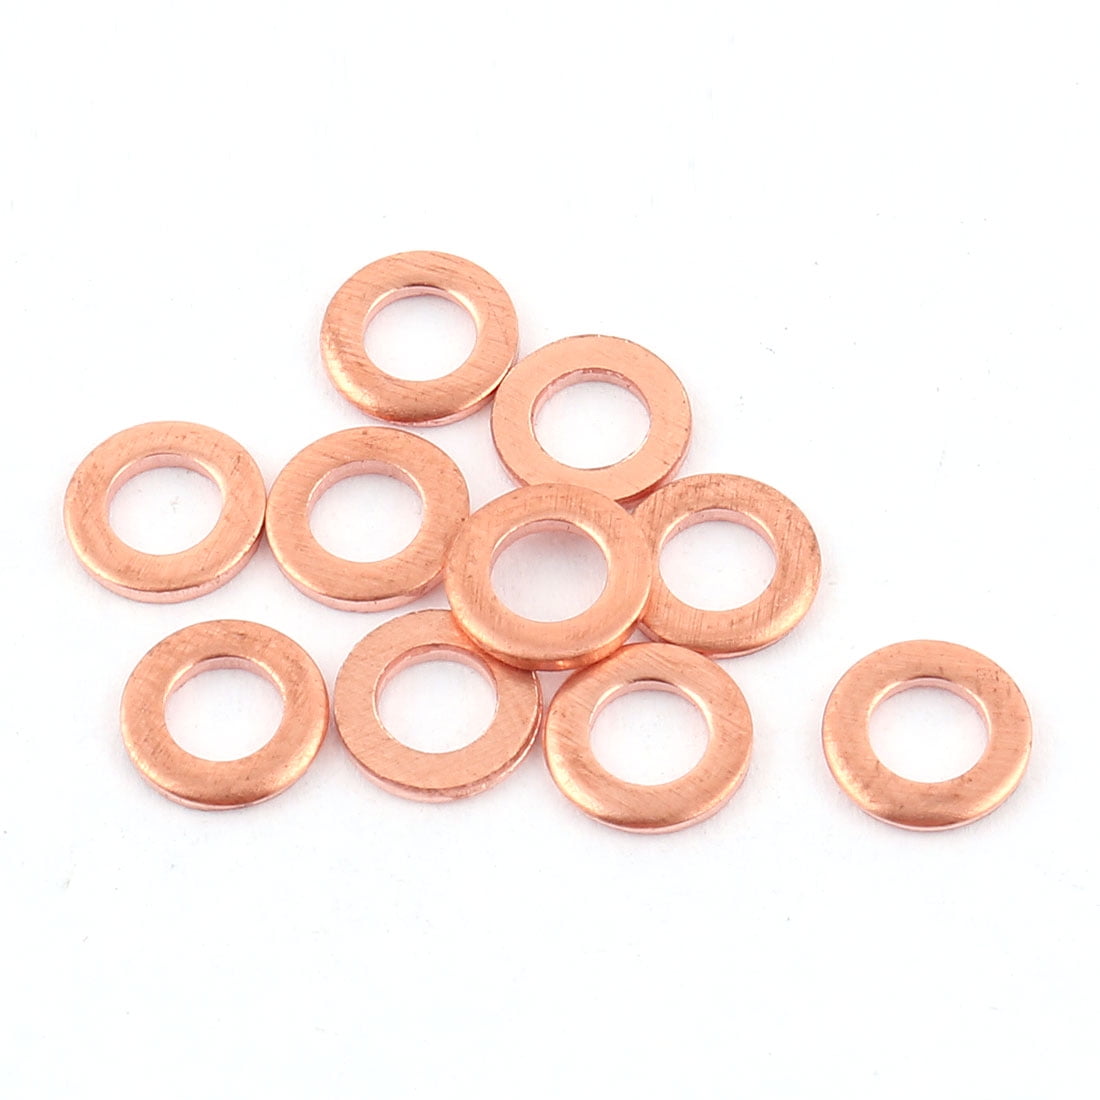 Pack of 50 Copper Washers 5mm x 9mm x 1mm 